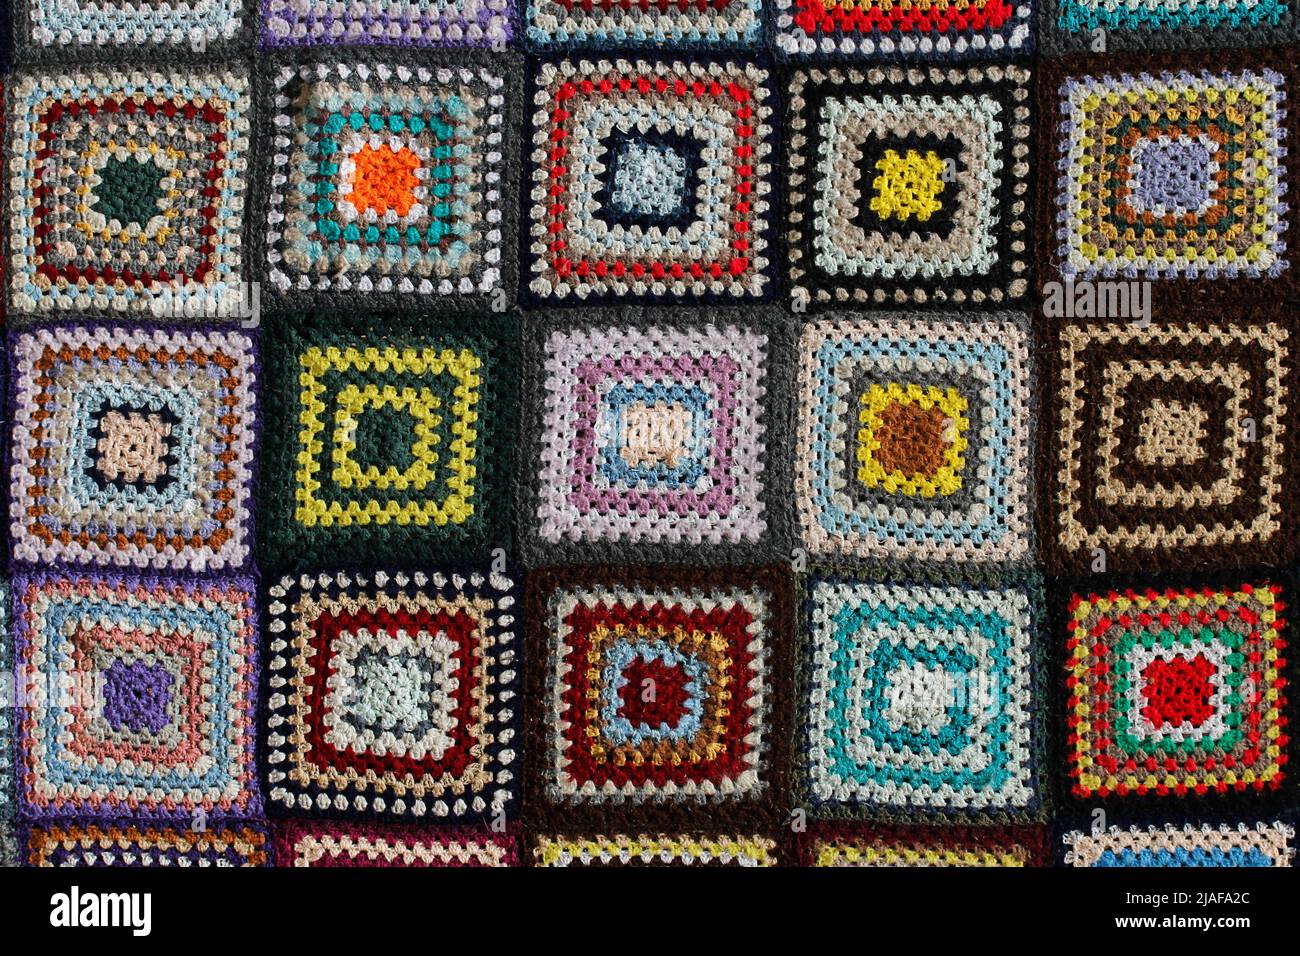 Detail of a crocheted patchwork multicolor wool blanket. Stock Photo